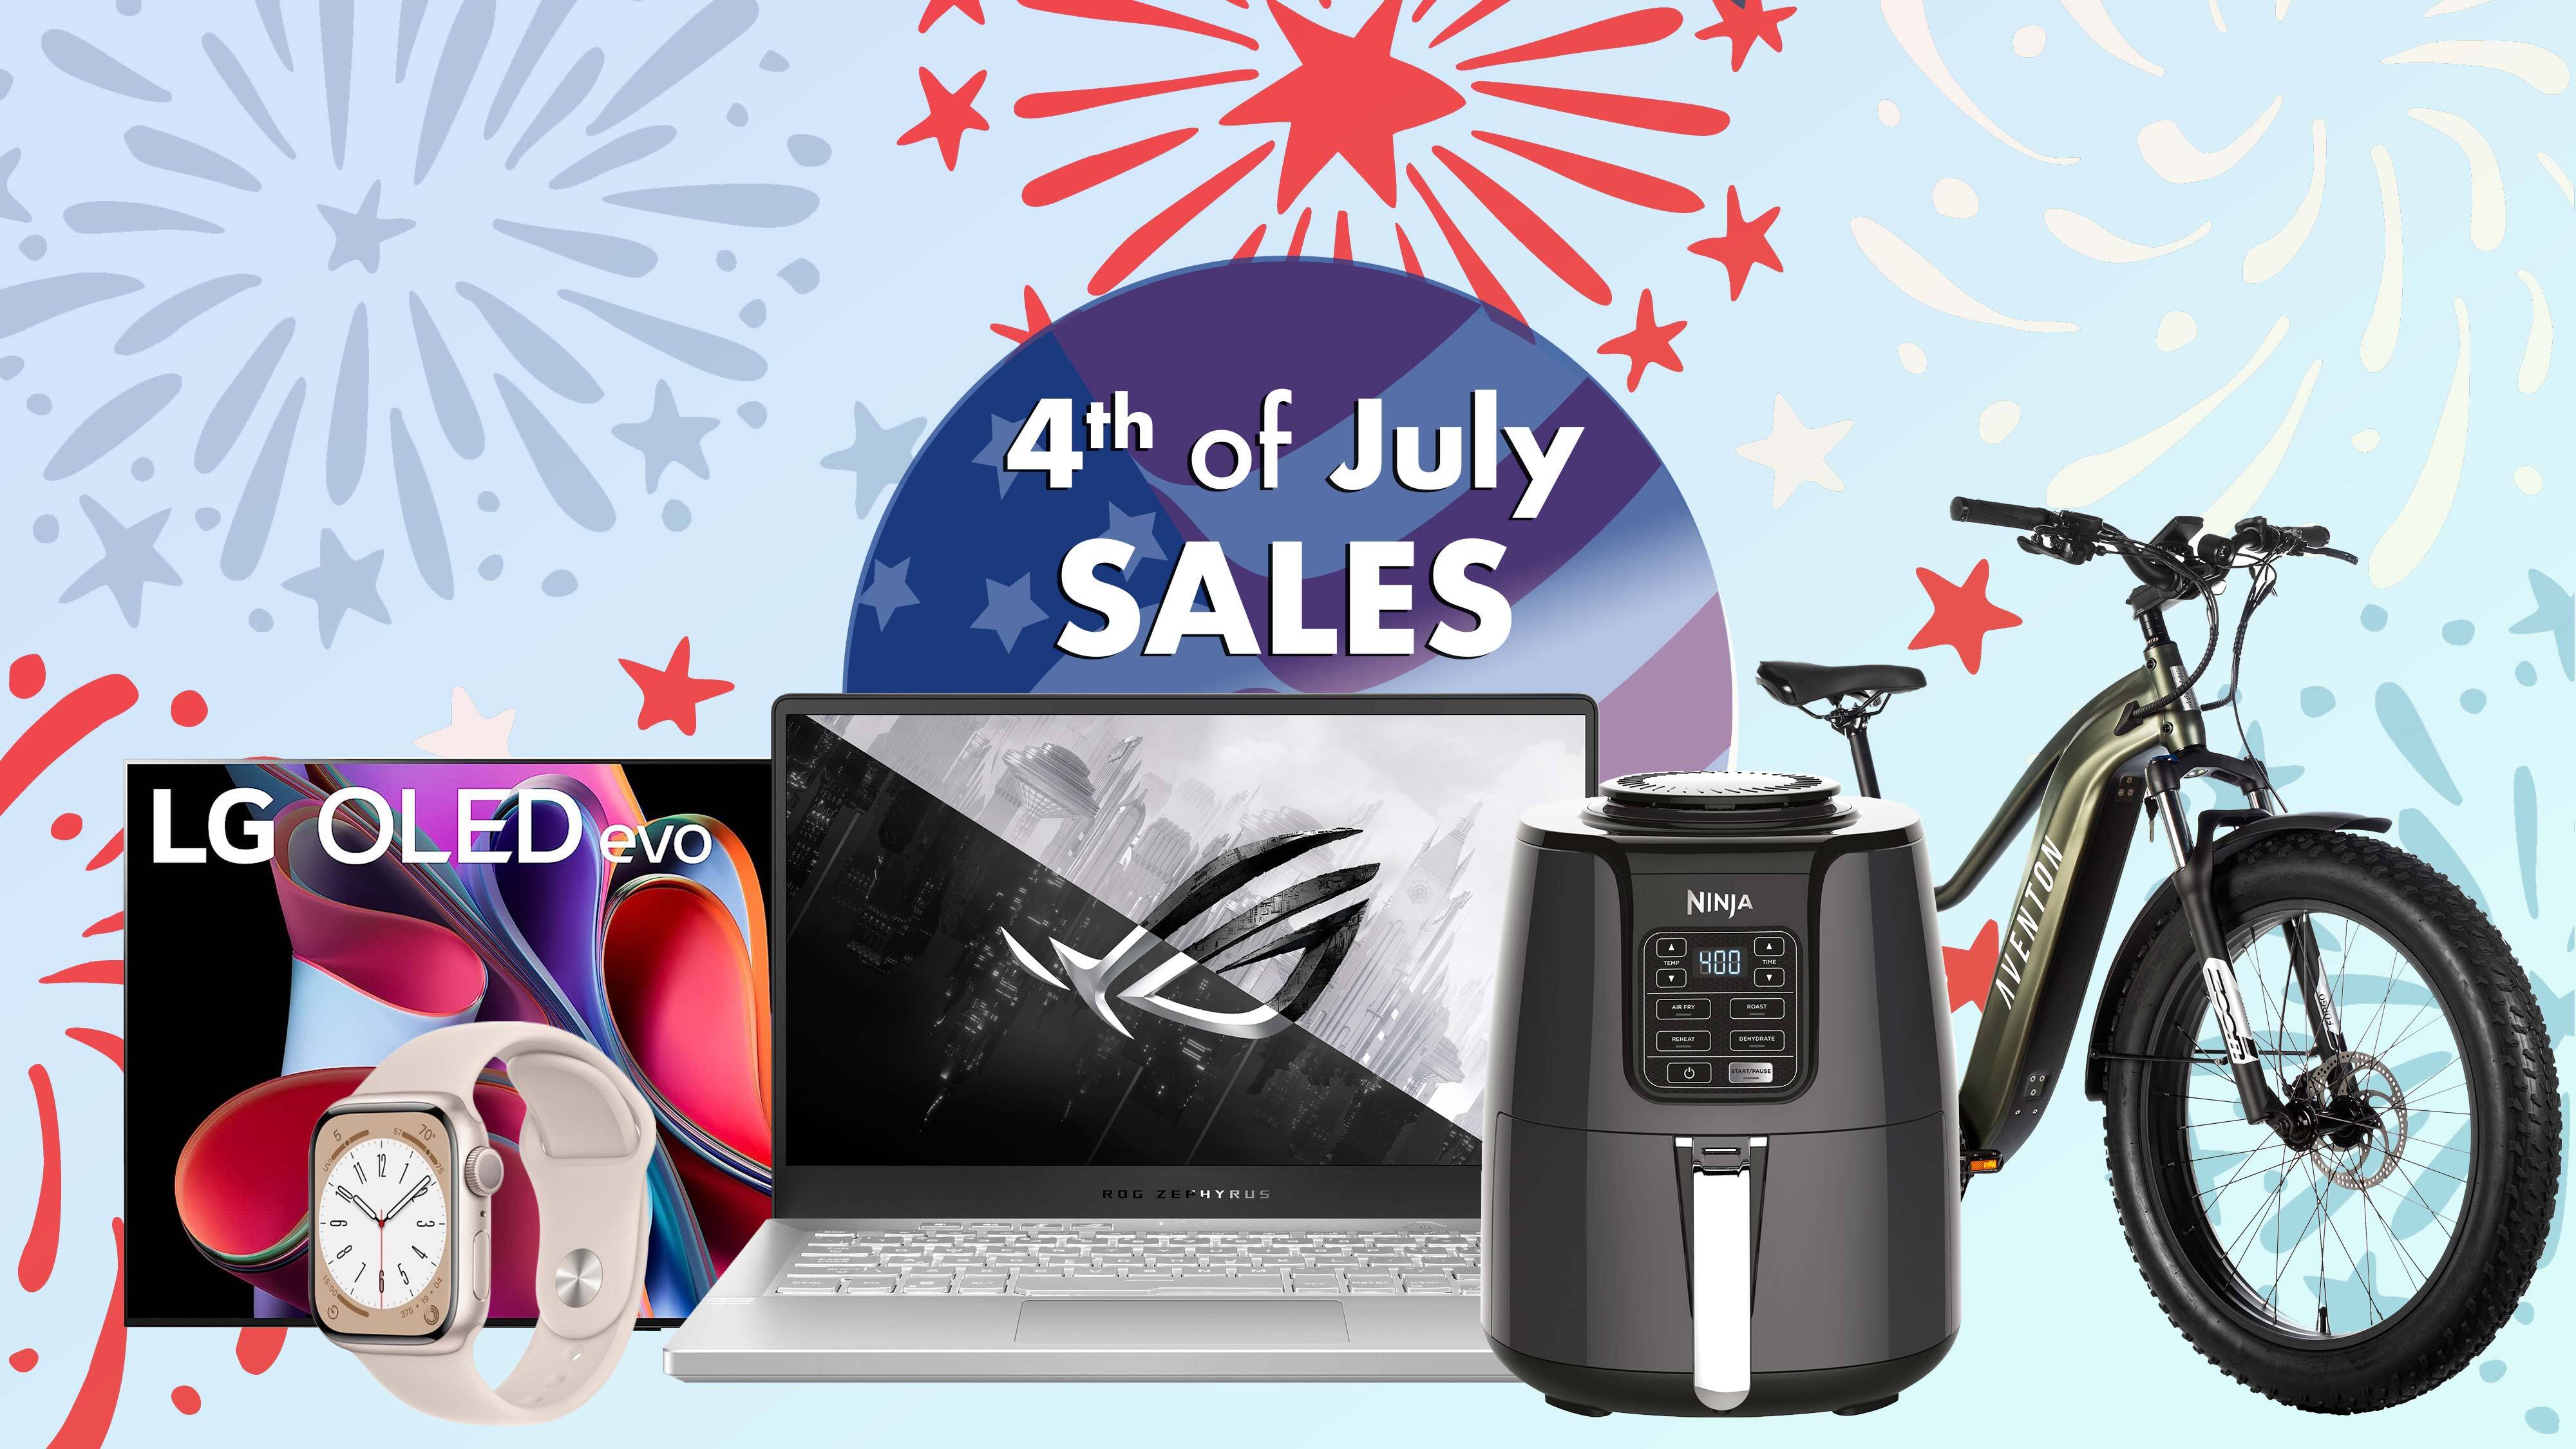 July 4th sale: Shop Walmart deals on TVs, pools, furniture and bikes